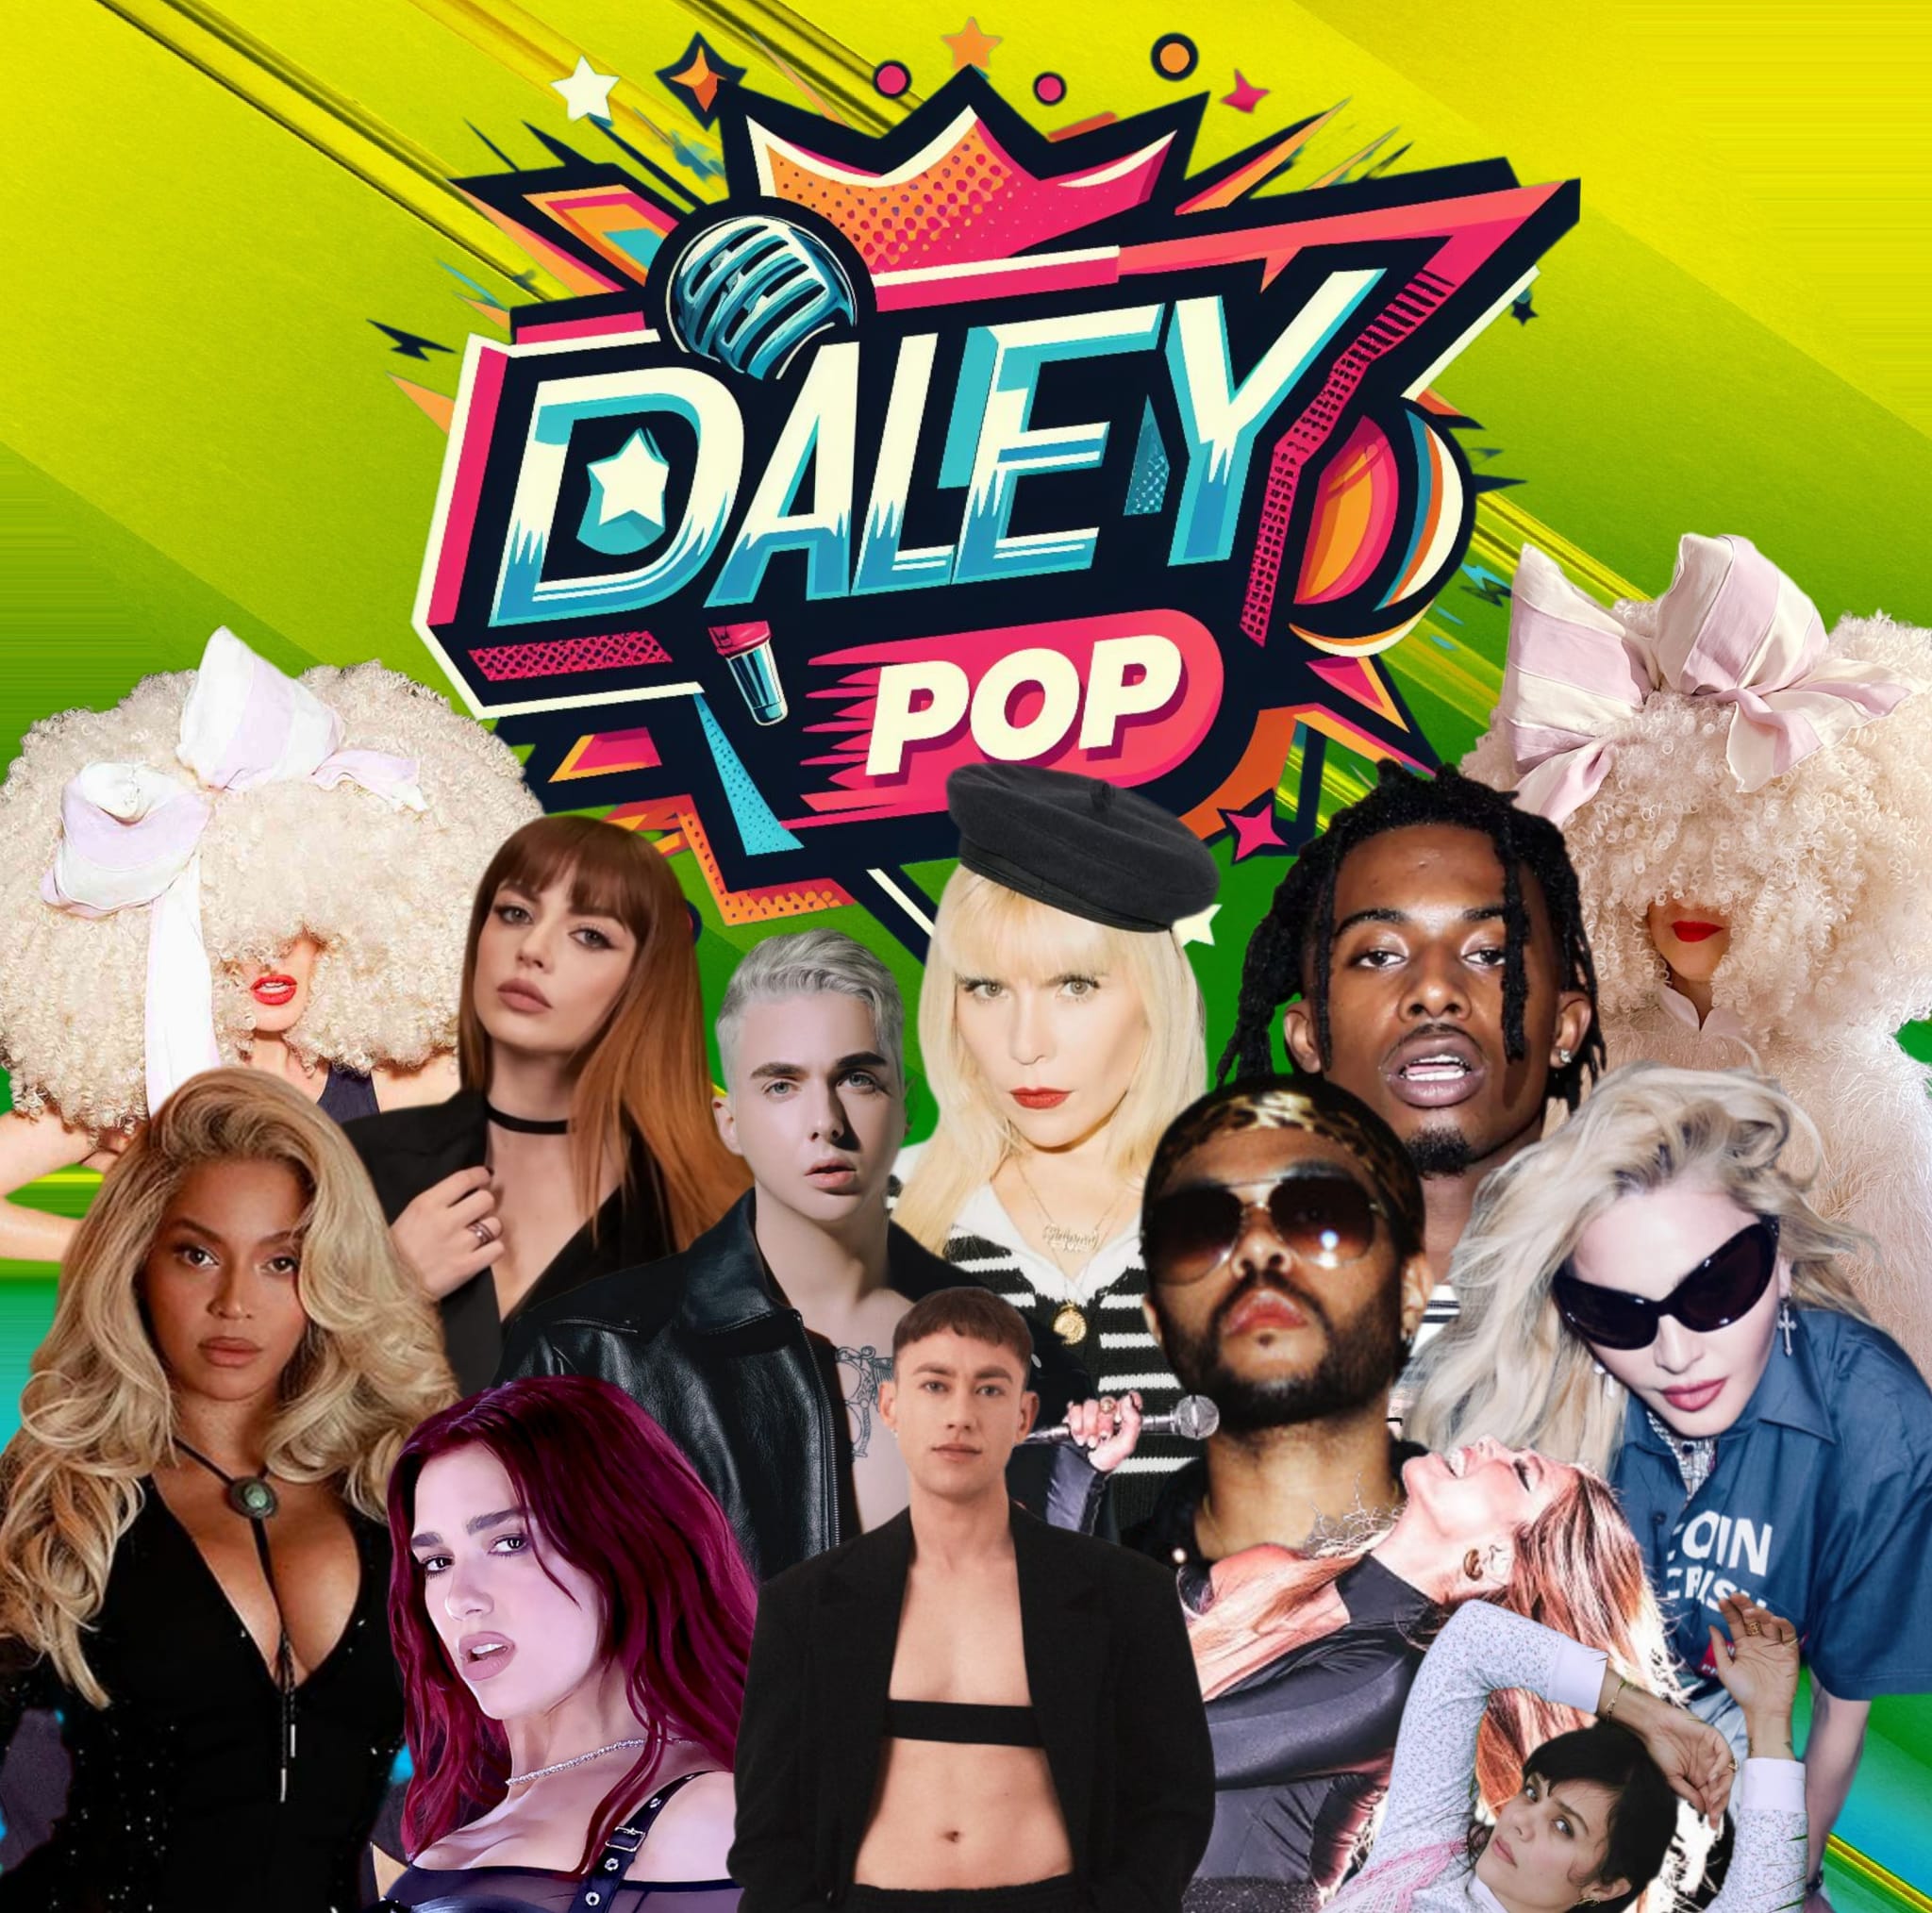 Queen Bey’s Country Groove, Bat For Lashes’ Melodic Whispers, and Olly Alexander’s Eurovision Dizziness: A #DALEYPOP Symphony!